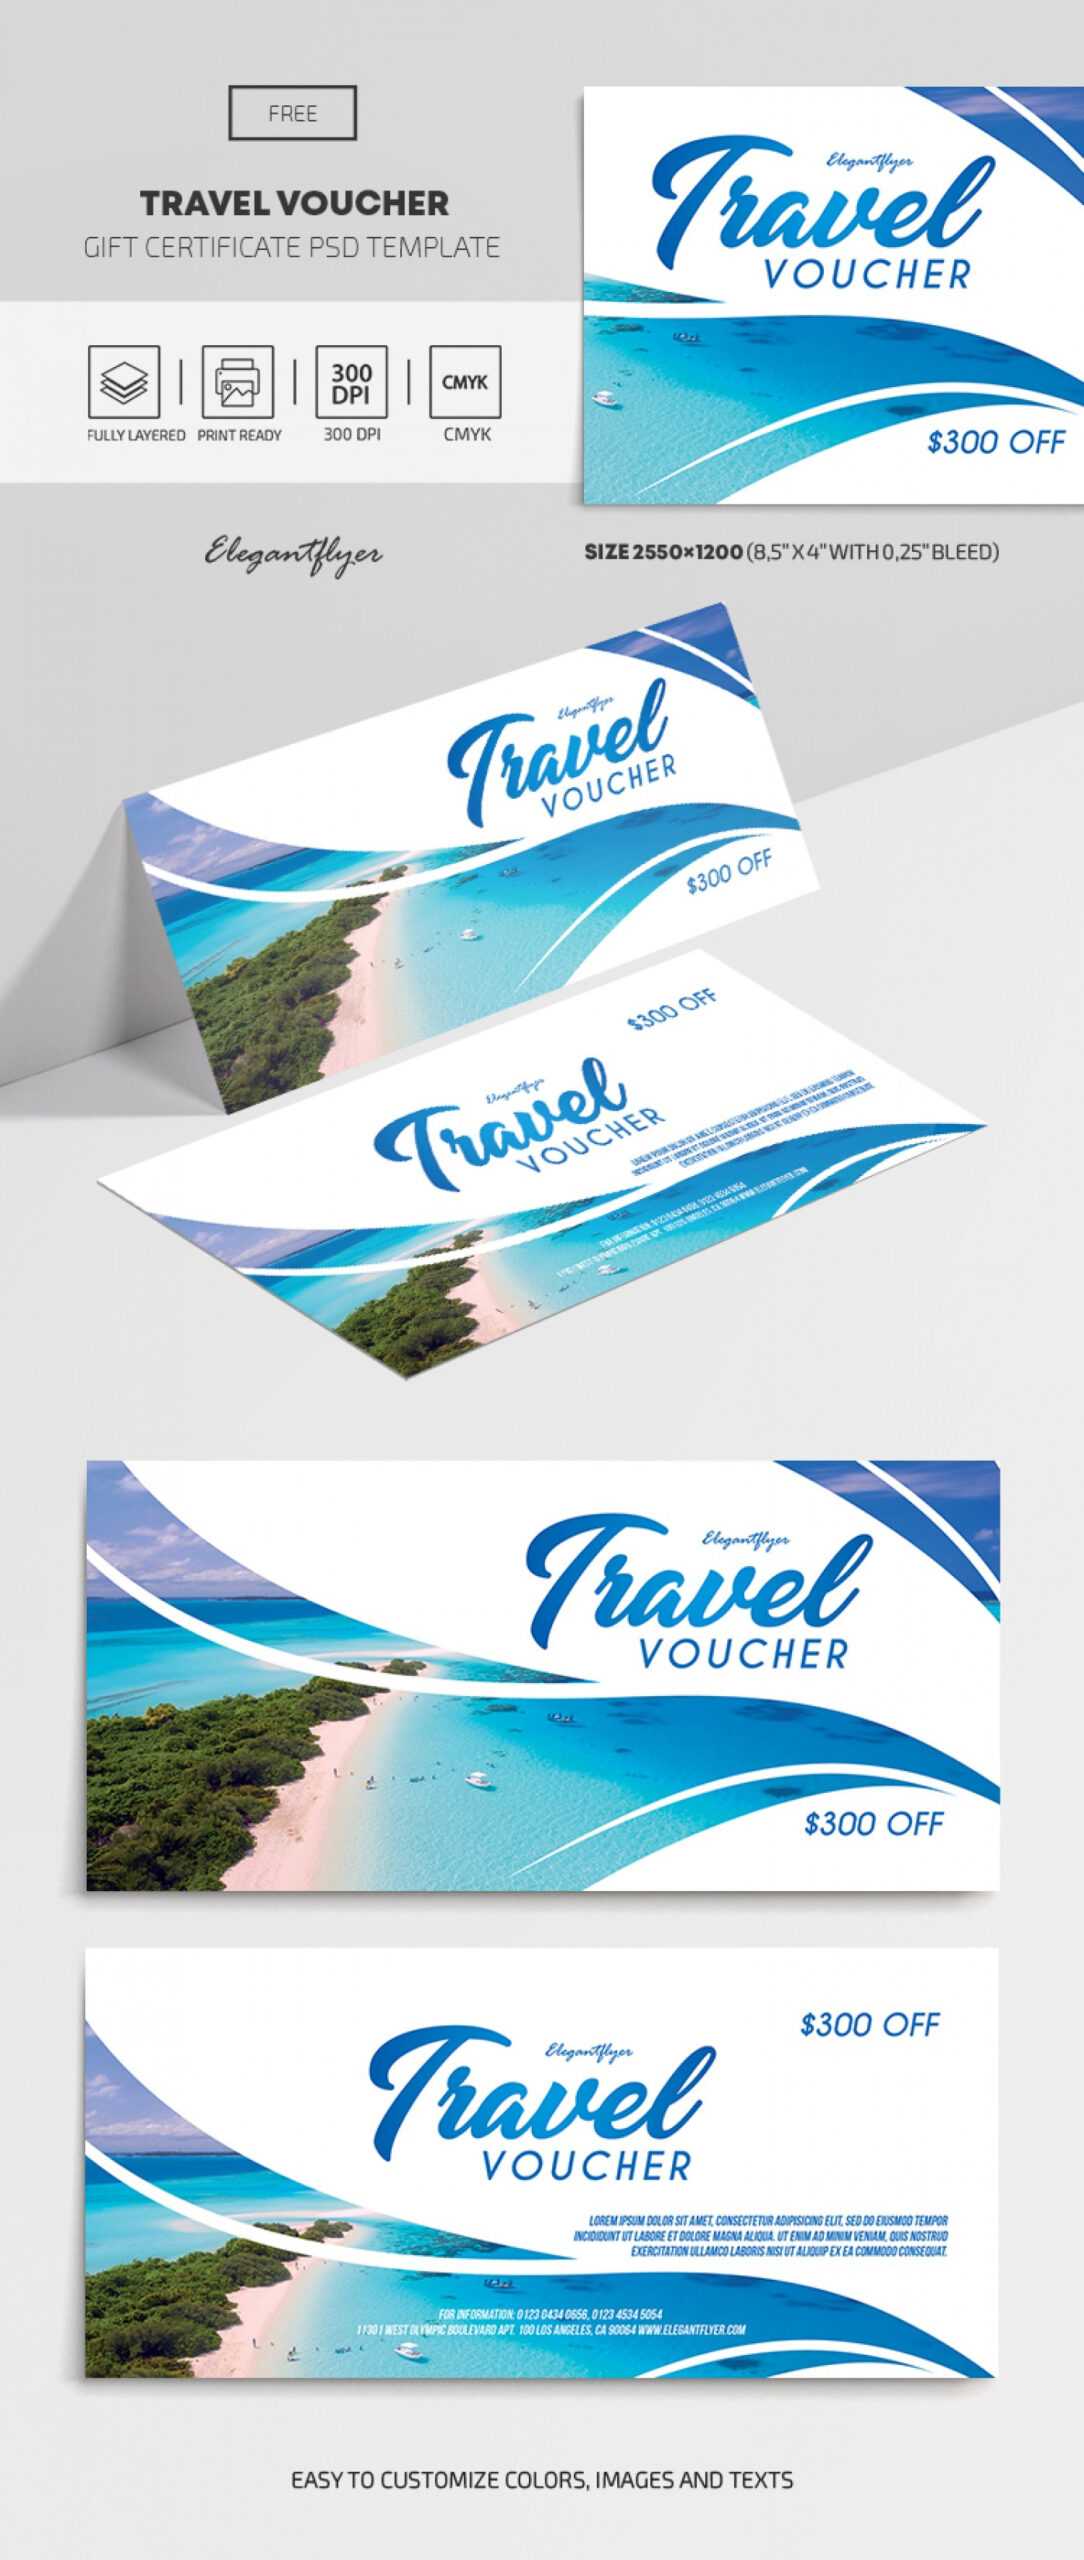 026 Template Ideas Travel Gift Certificate Stirring Free For Free Travel Gift Certificate Template